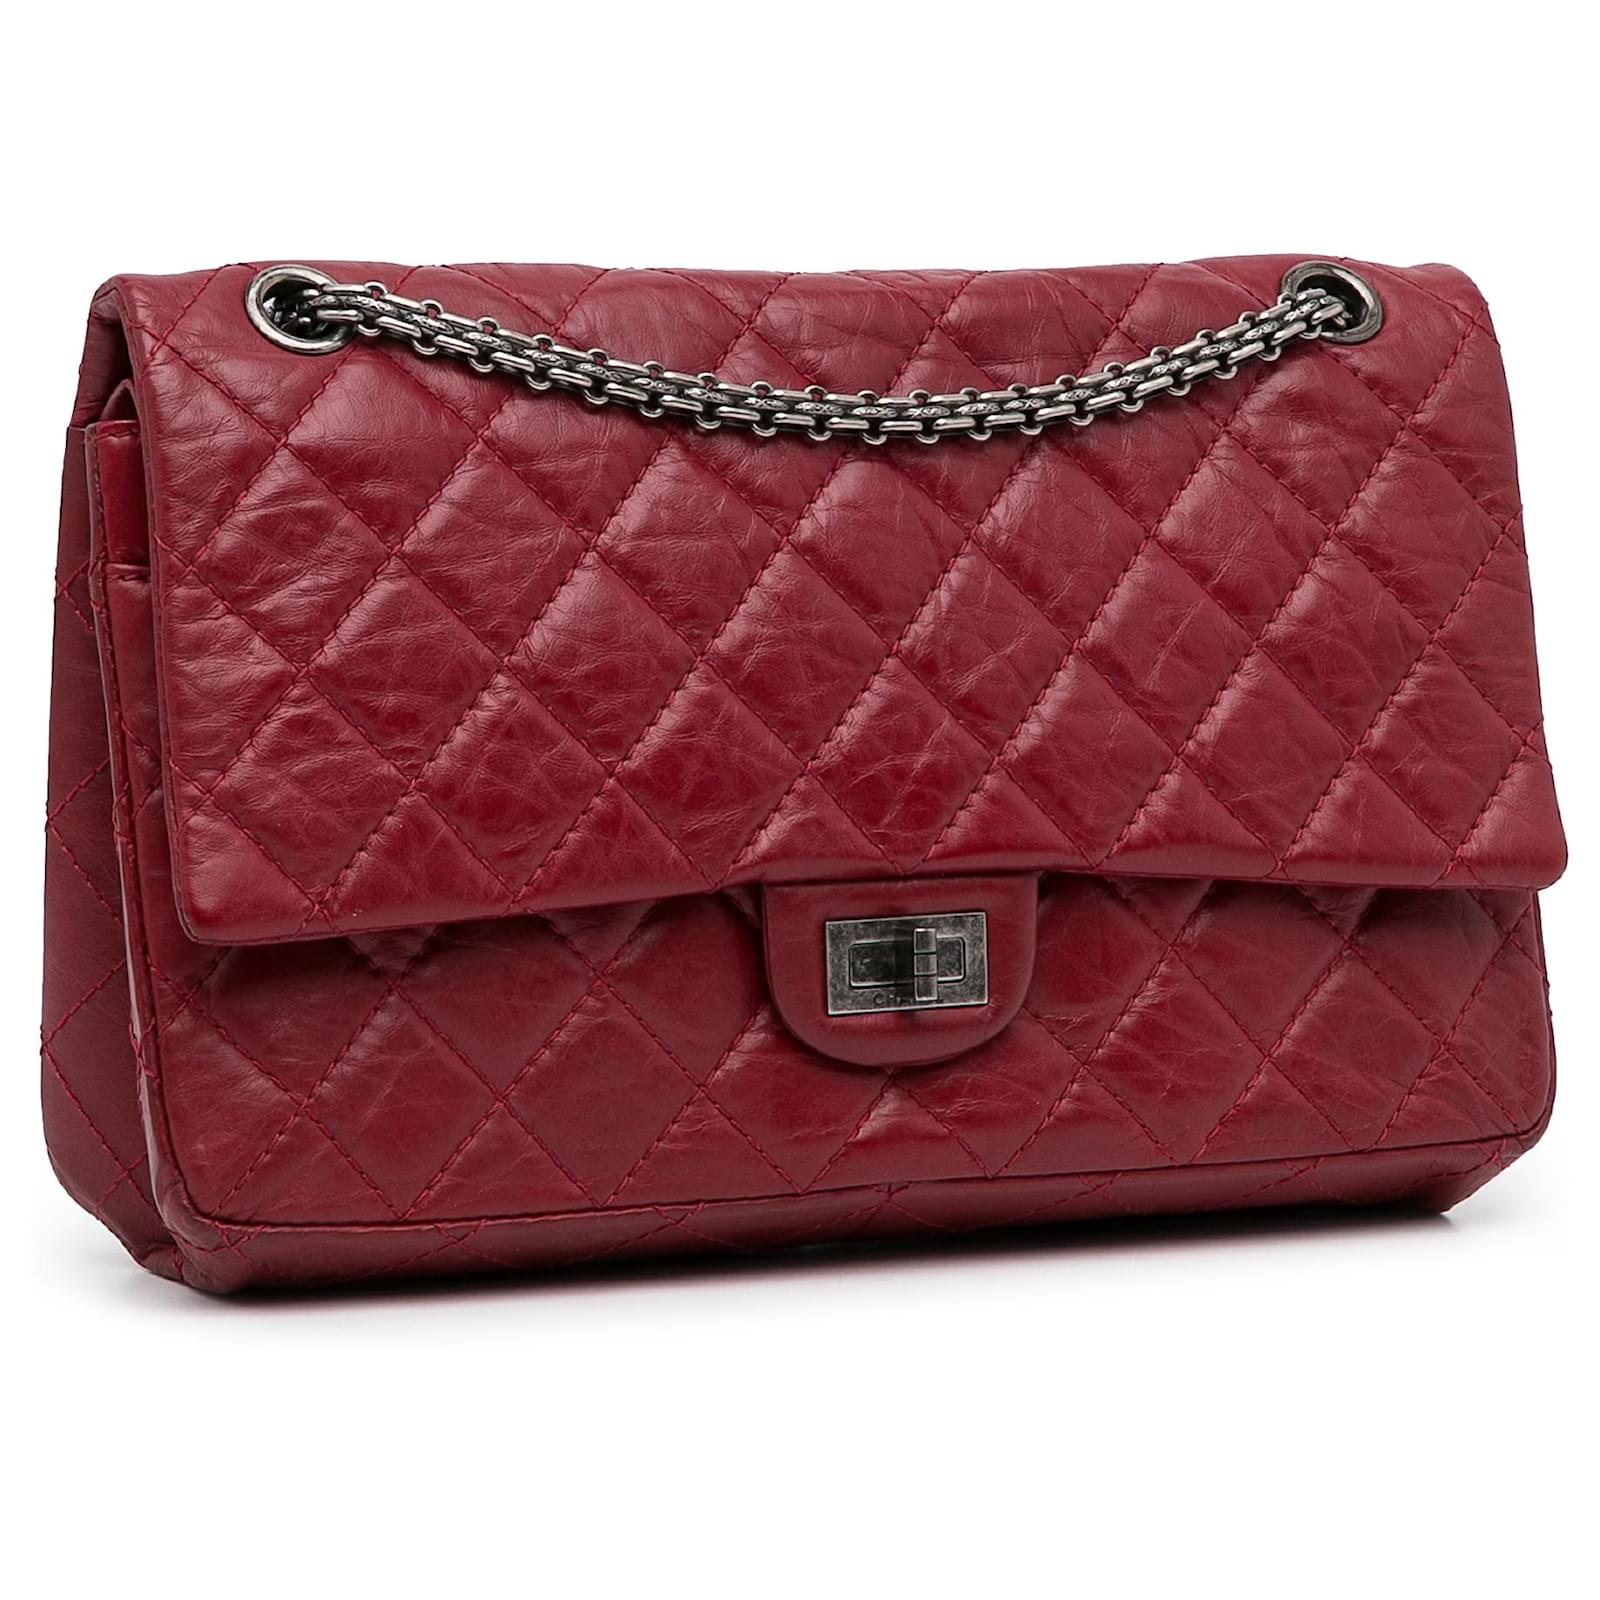 Chanel Red 2.55 Reissue 227 Double Flap Bag Leather Pony-style